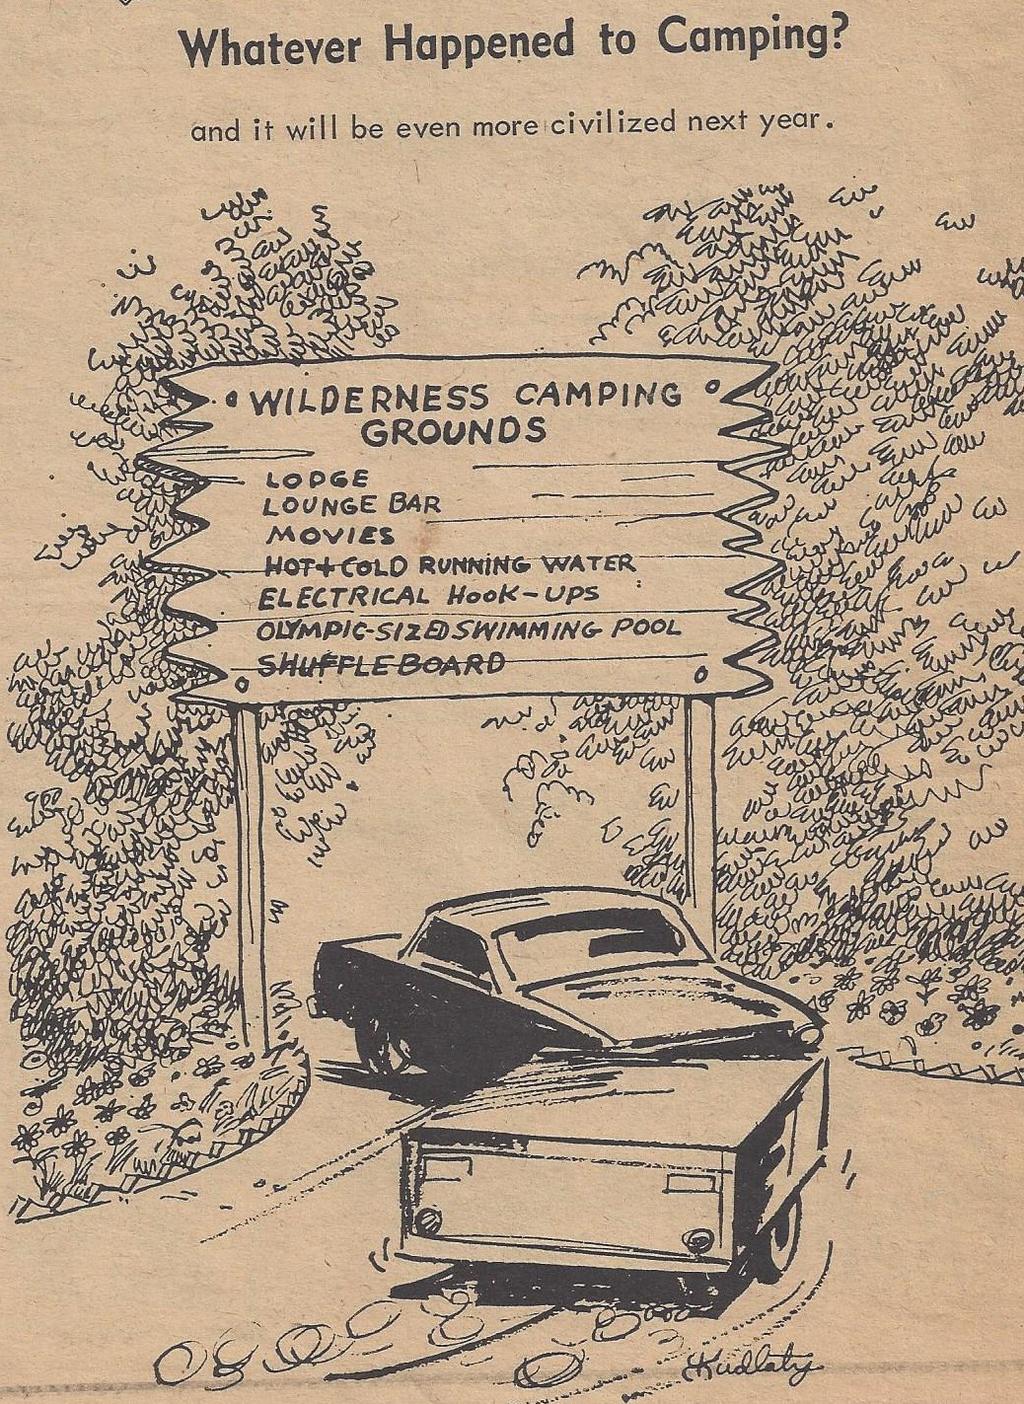 Bob Weiss sent this over it was clipped from The Lake Country Reporter, Date: Sept 10, 1970 So evidently this camping evolution has been going on for quite some time!